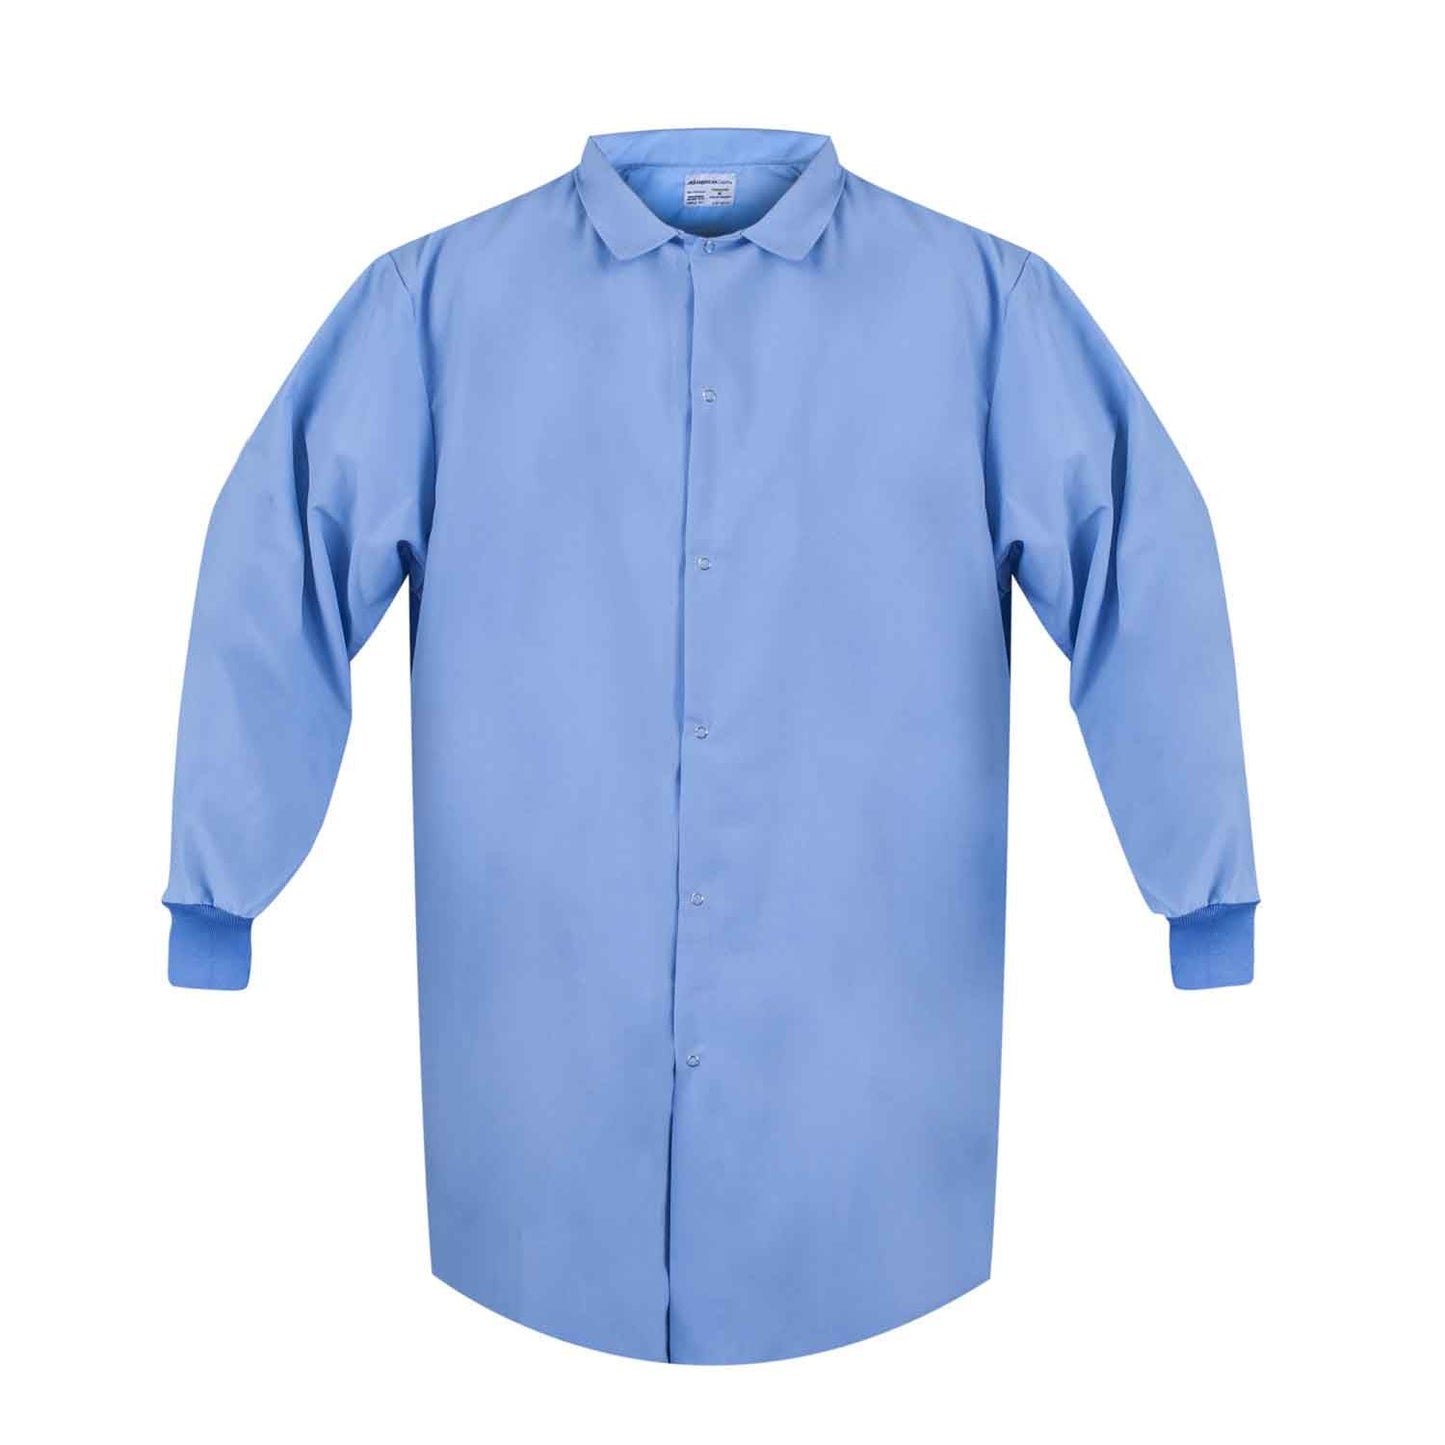 American Dawn | X-Small Light Blue Lab Coat With Long Sleeves And No Pockets